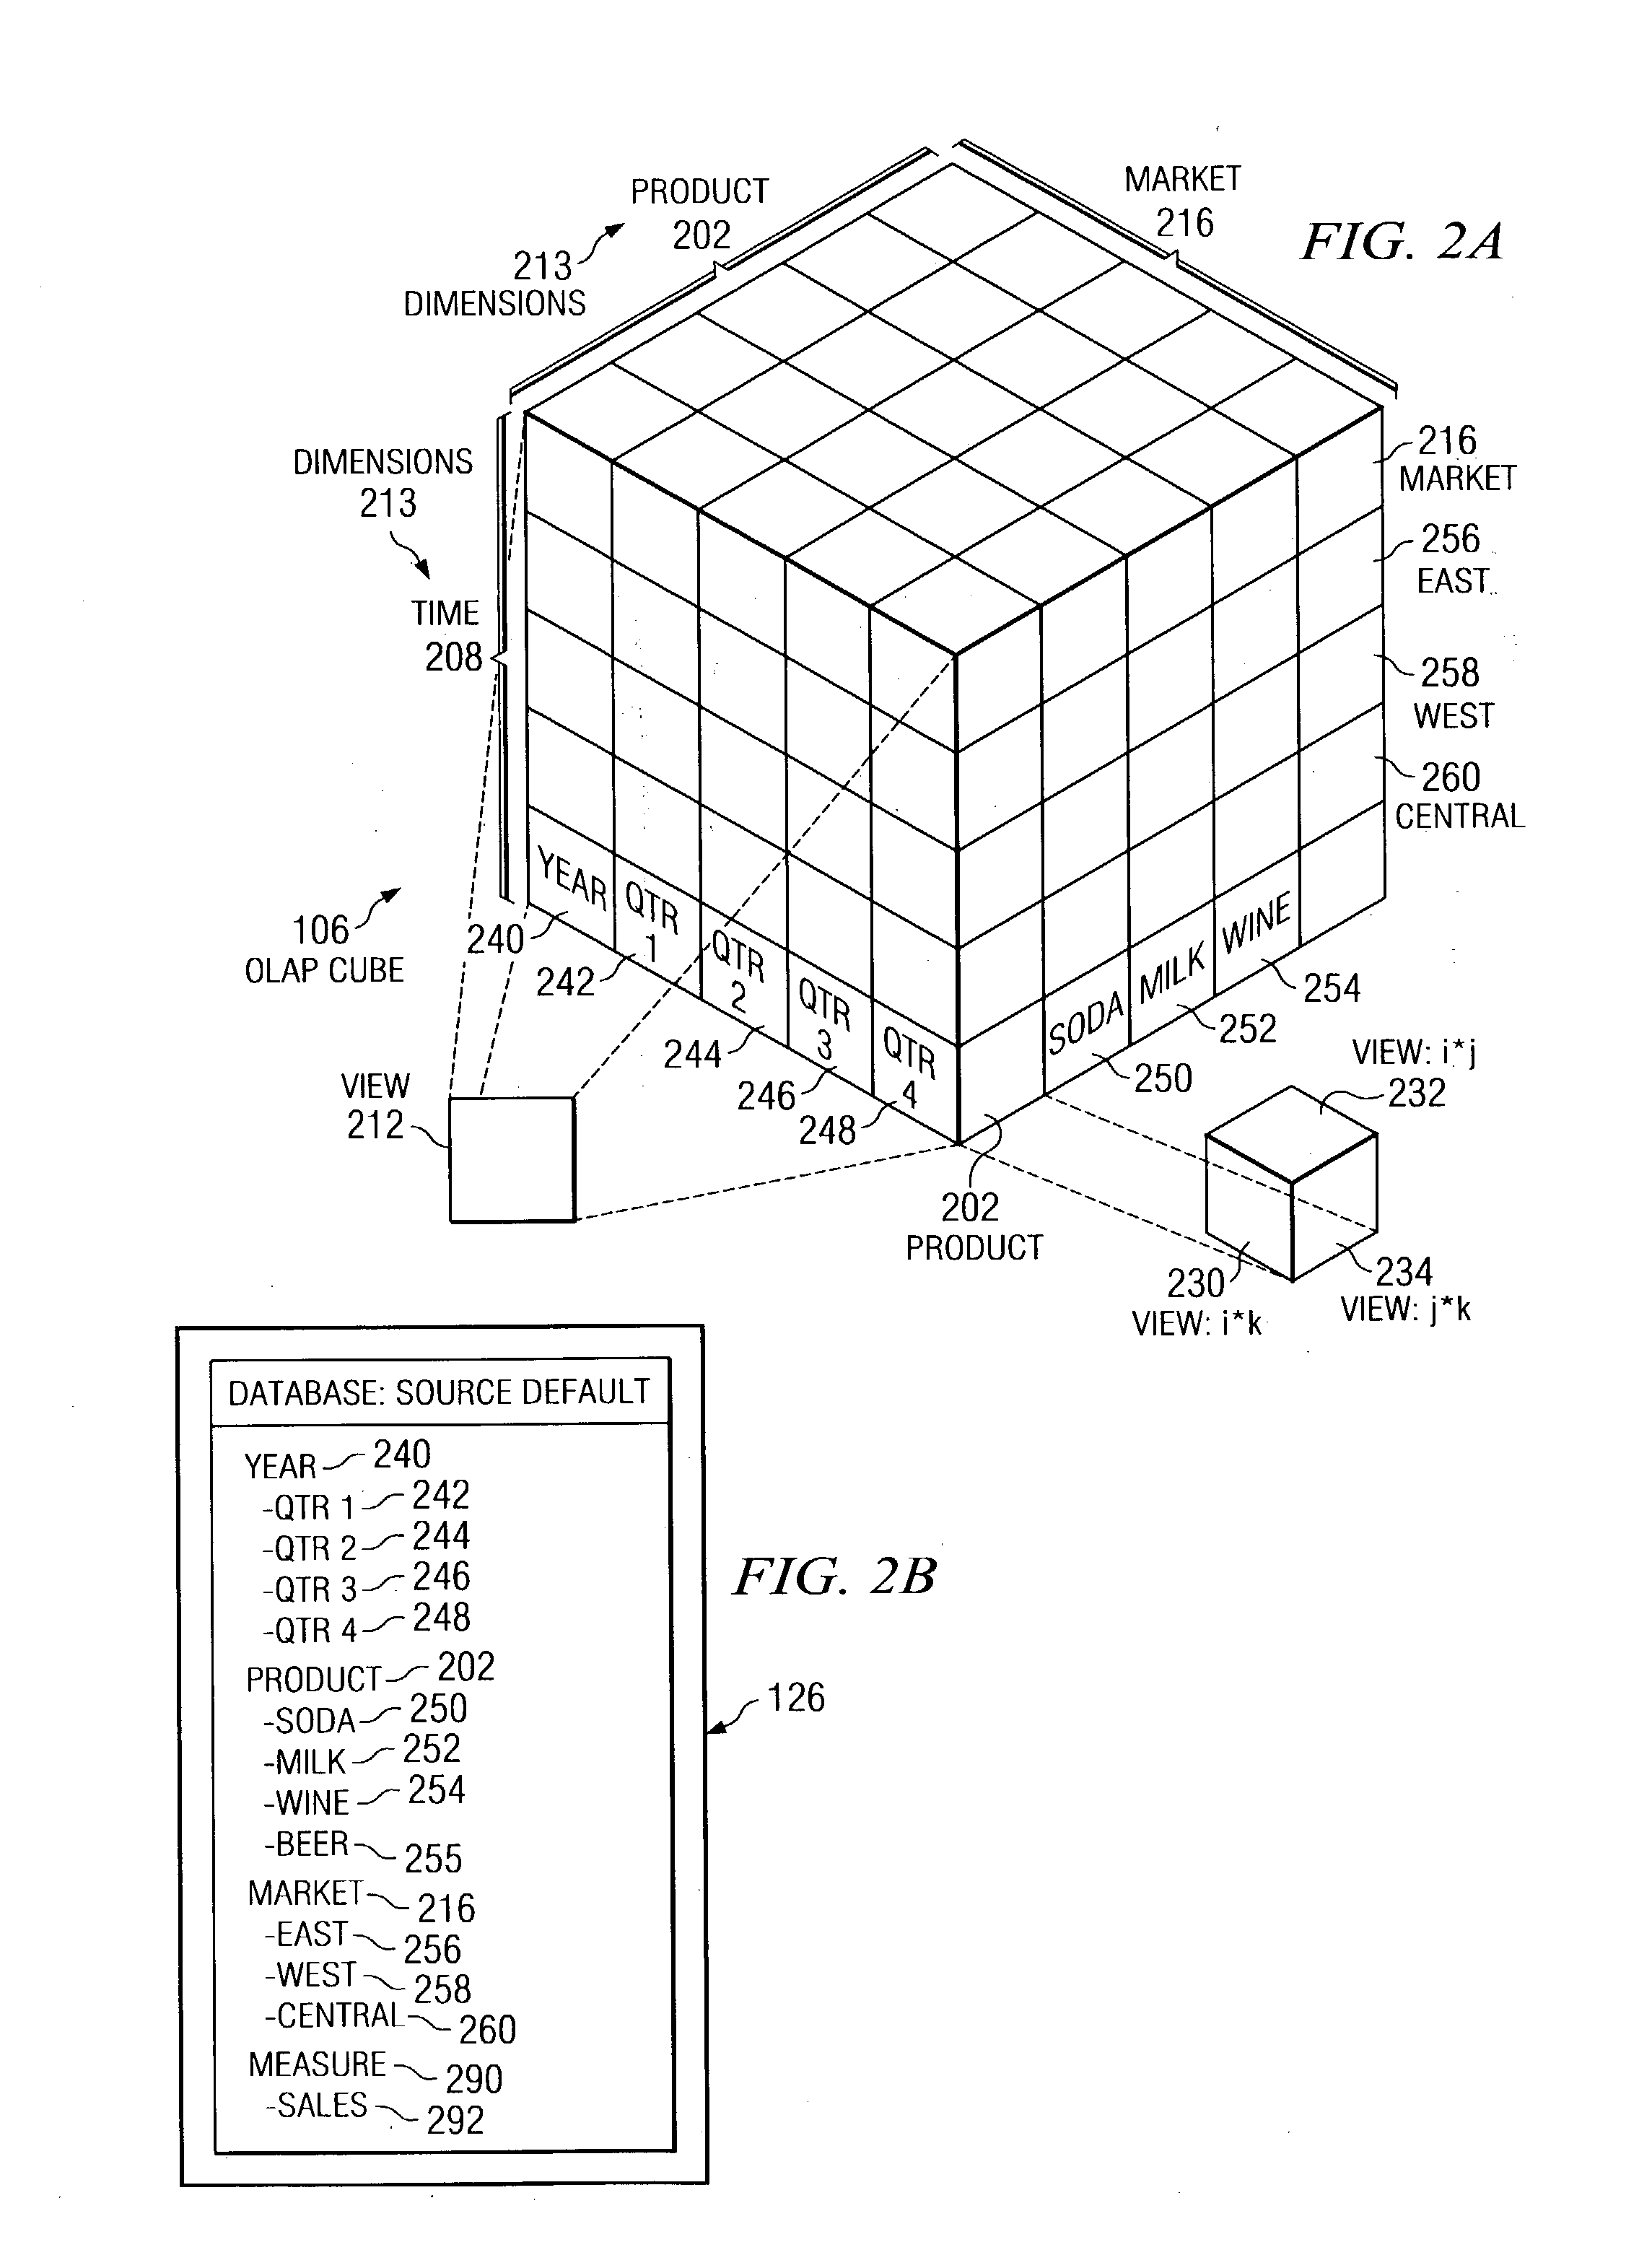 Systems, methods, and computer program products to identify related data in a multidimensional database